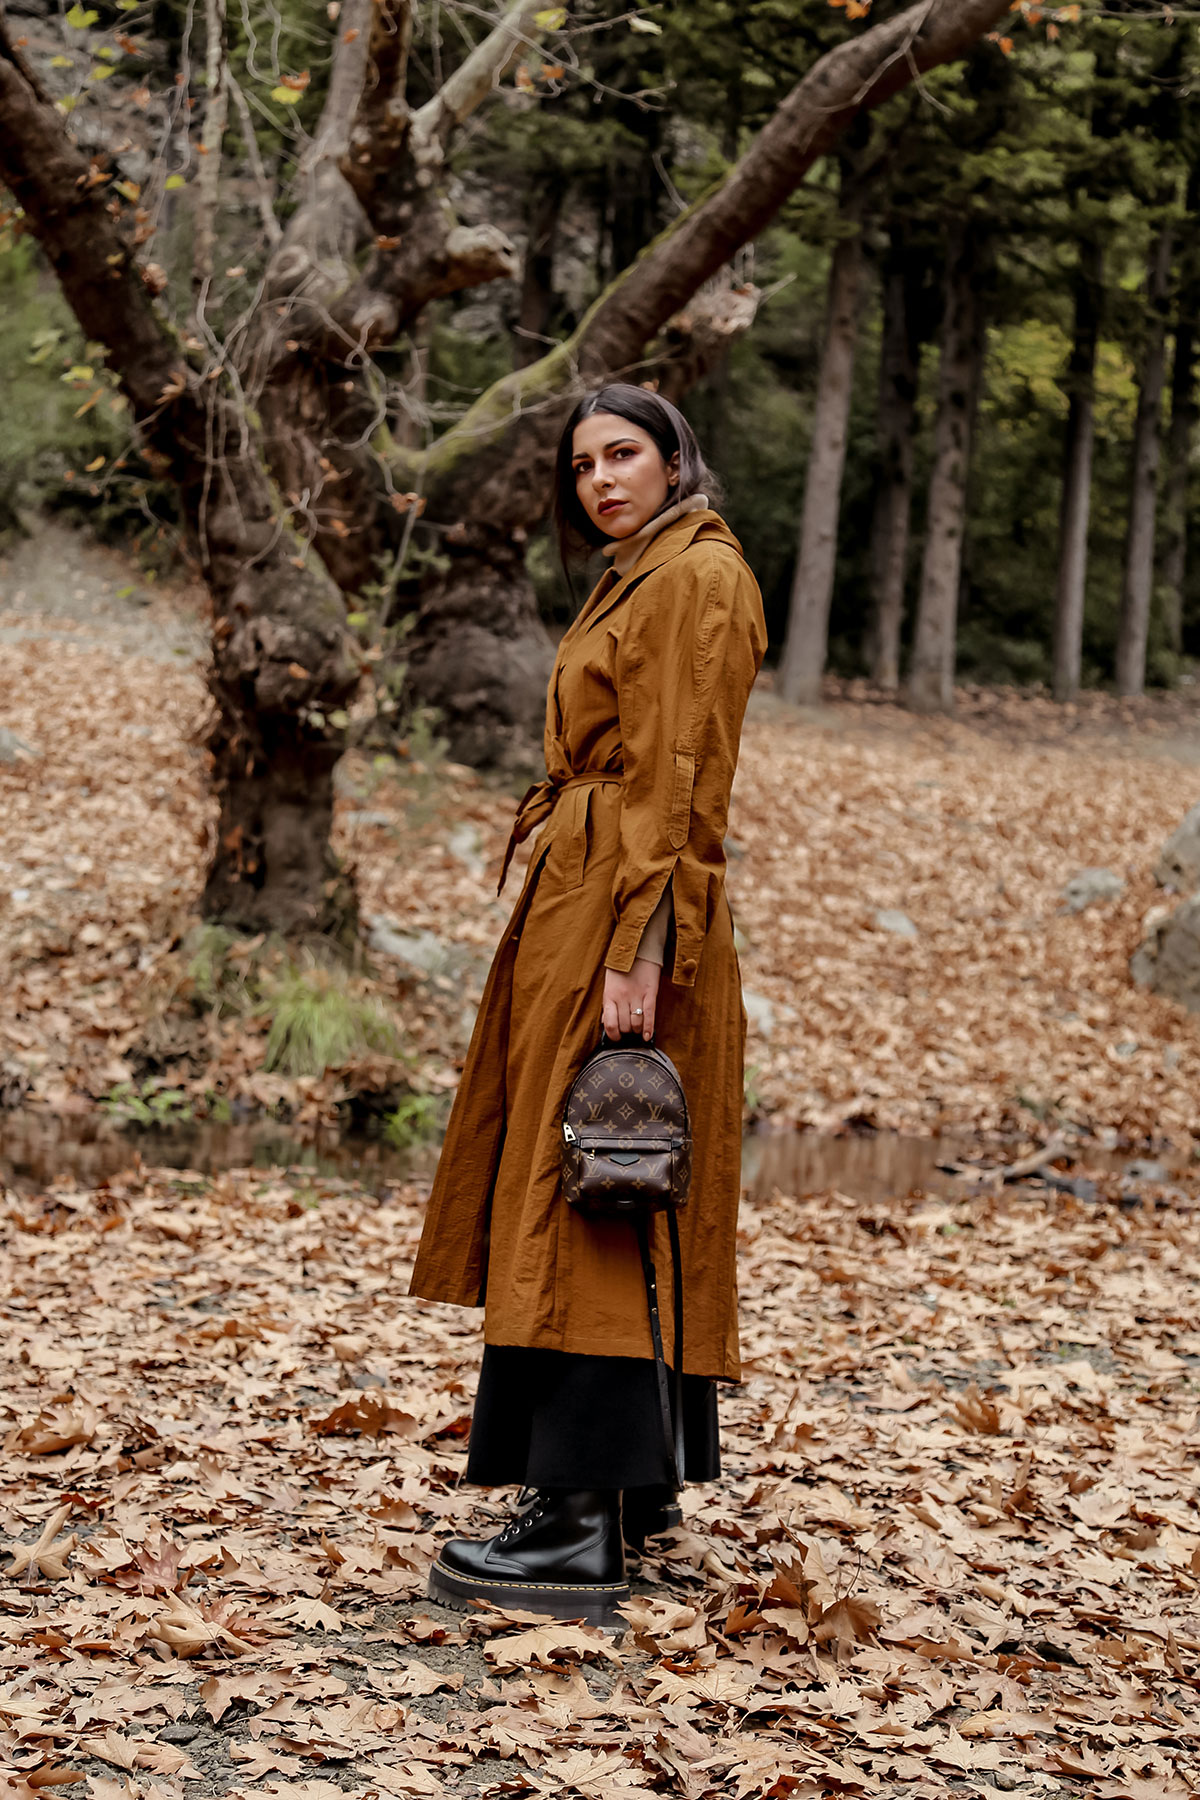 Trench coat and other favourite fall wardrobe staples by Stella Asteria - wearing turtleneck sweater with knit skirt and Dr Martens boots, vintage trench coat